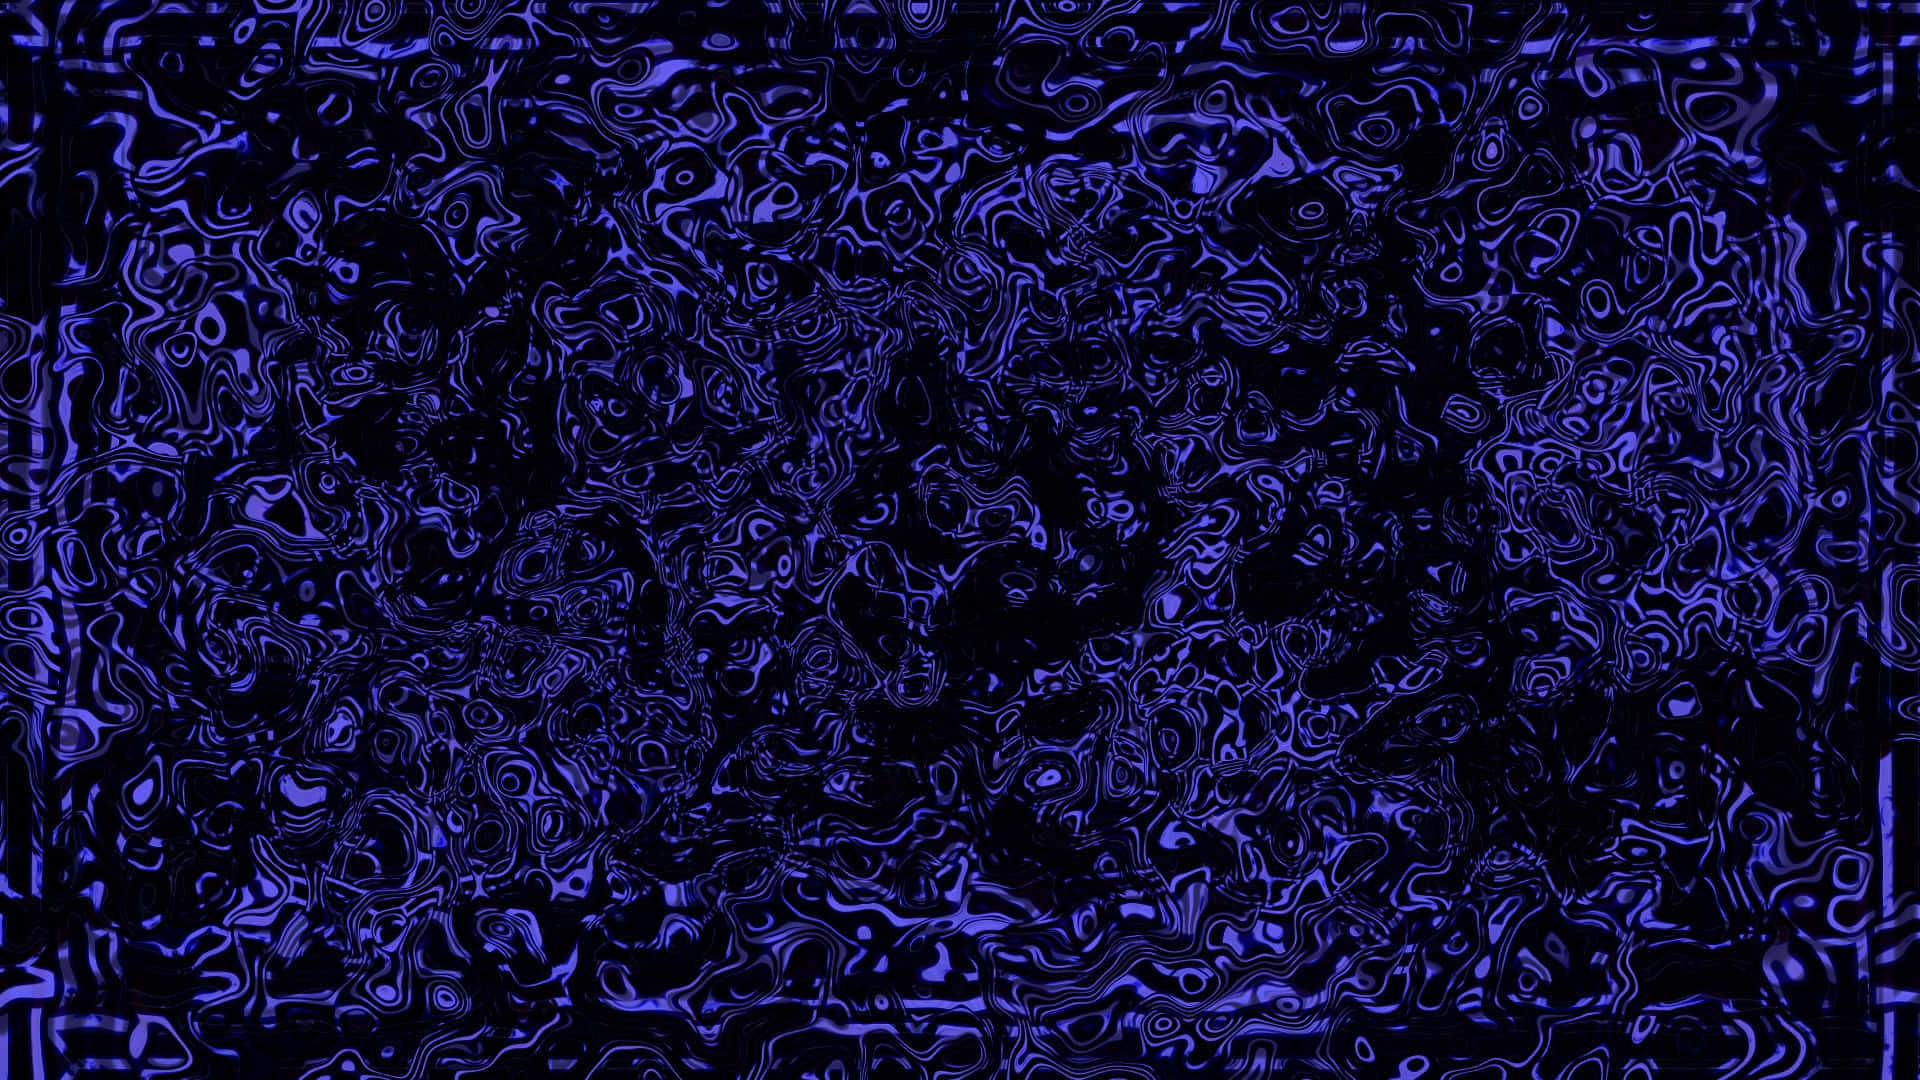 Abstract Blue Psychedelic Patterns.jpg Wallpaper